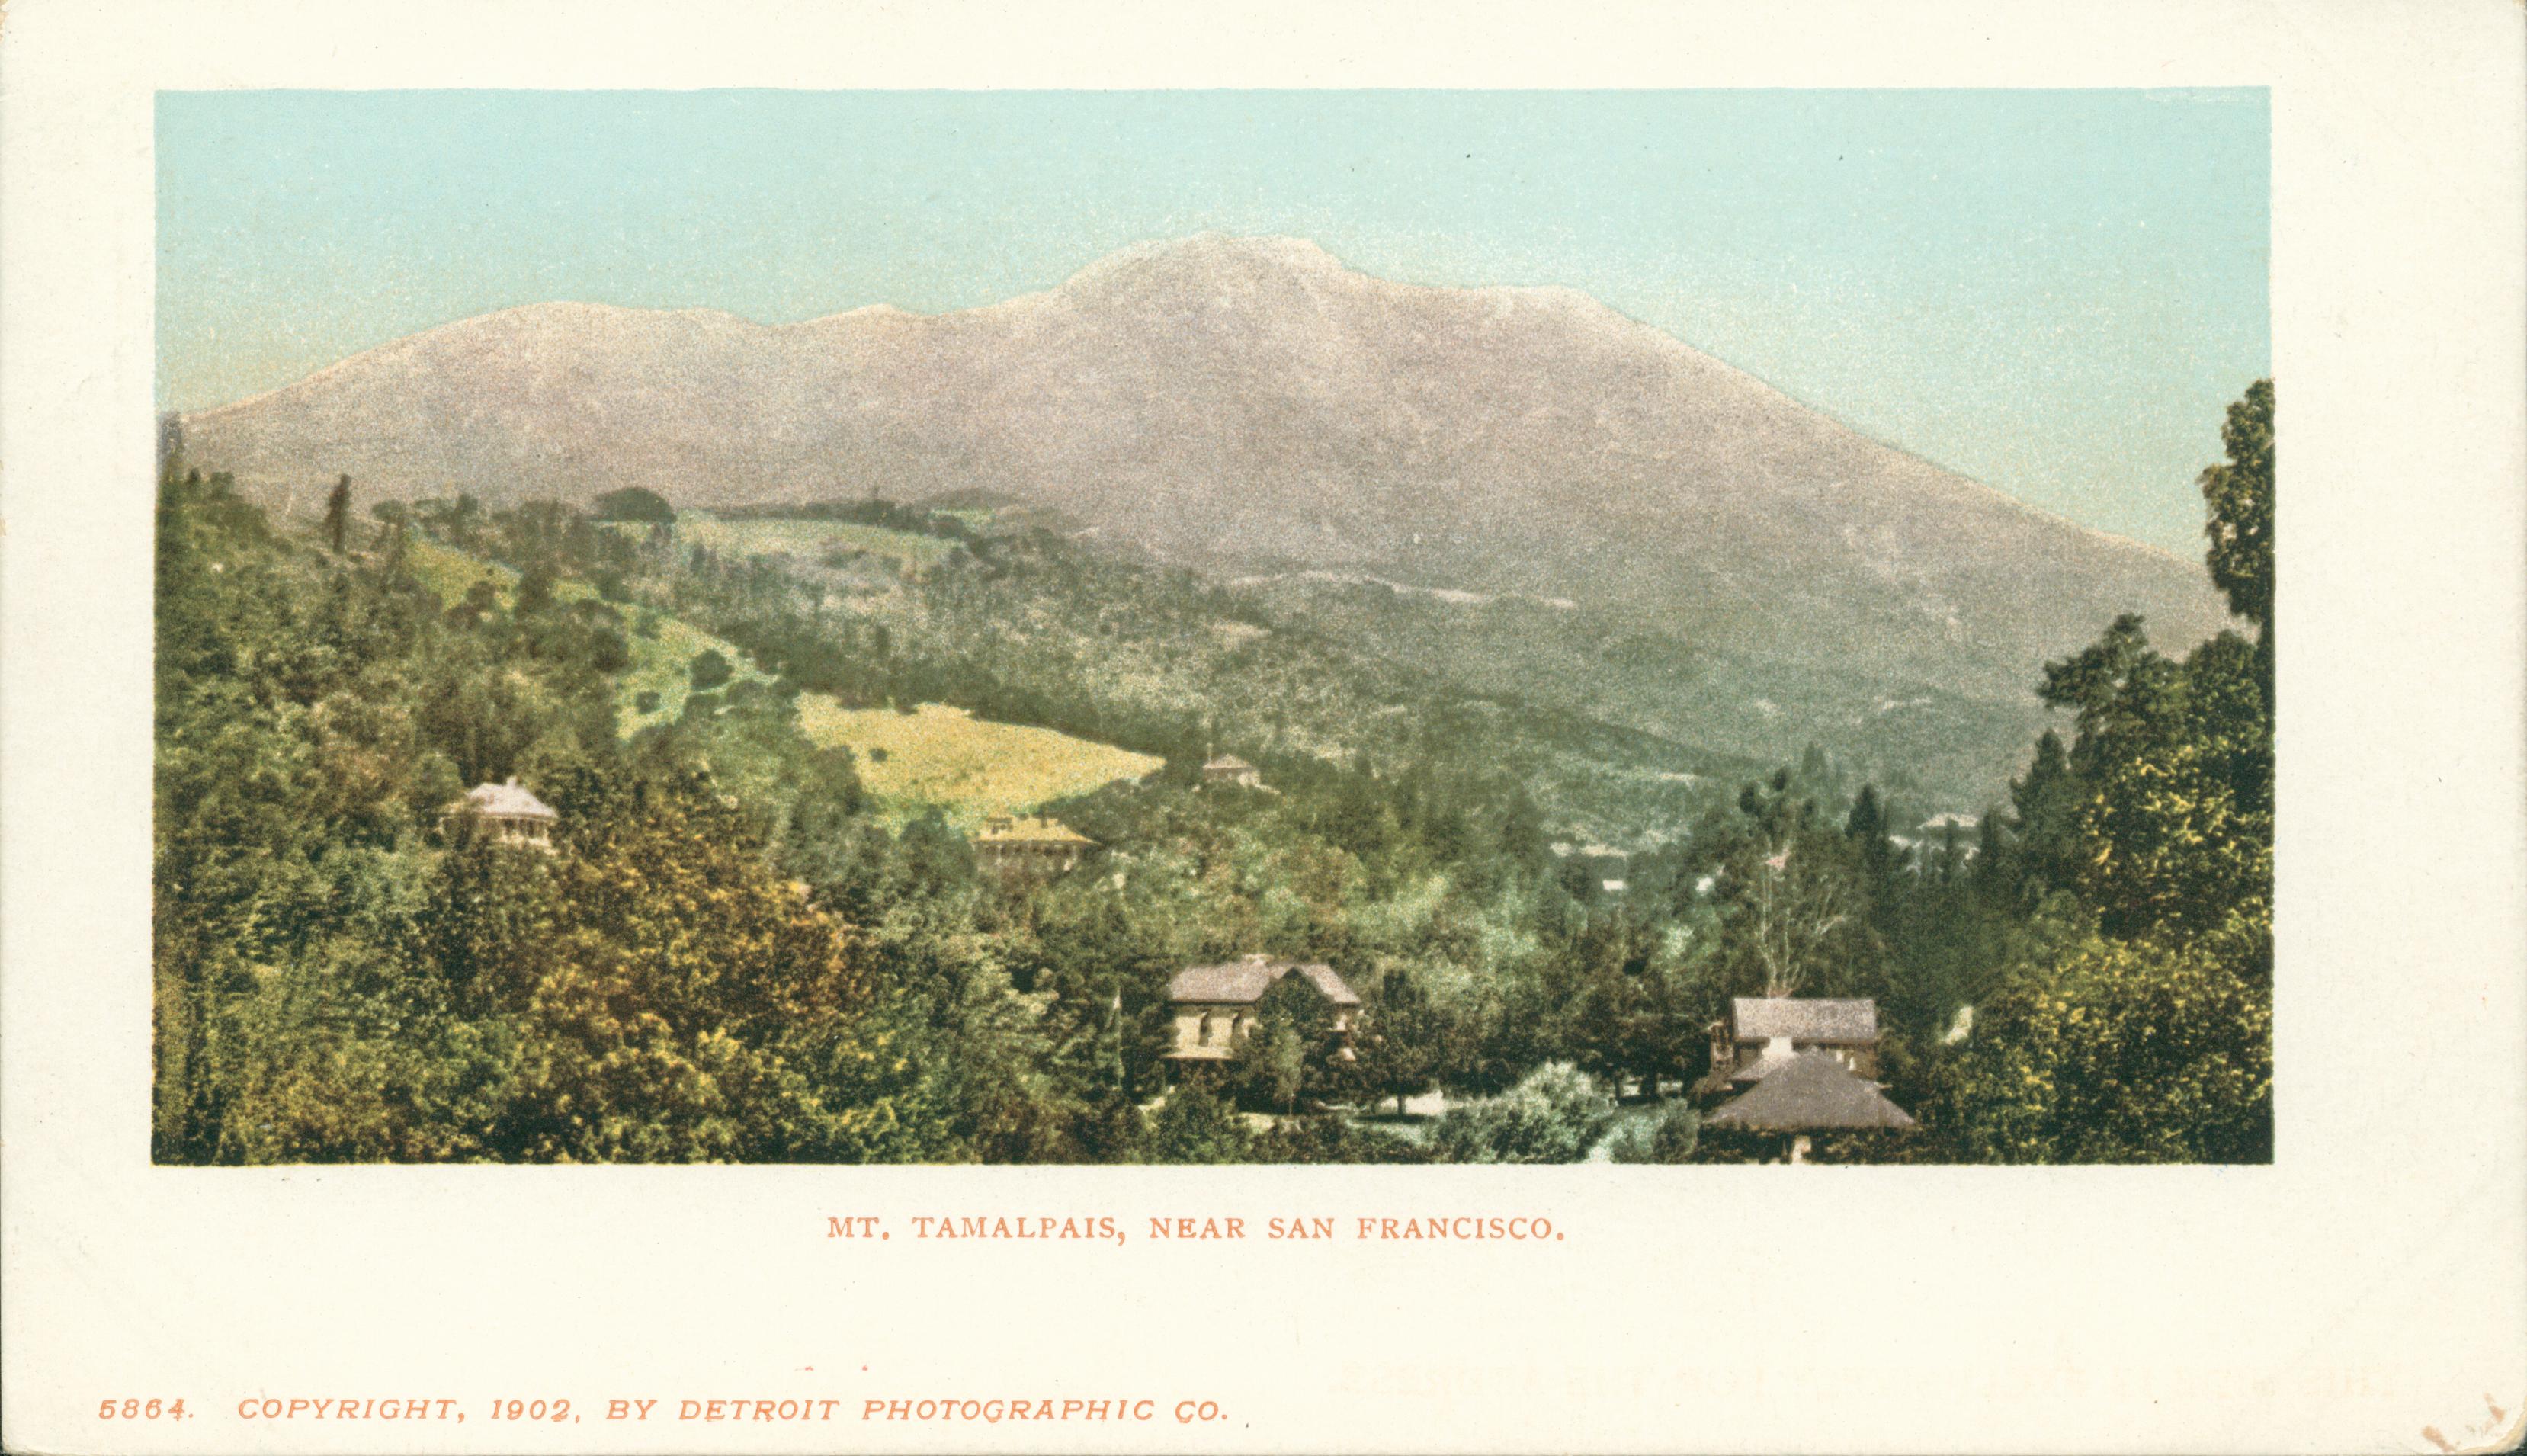 View of Mt. Tamalpais, trees, hills and buildings in foreground